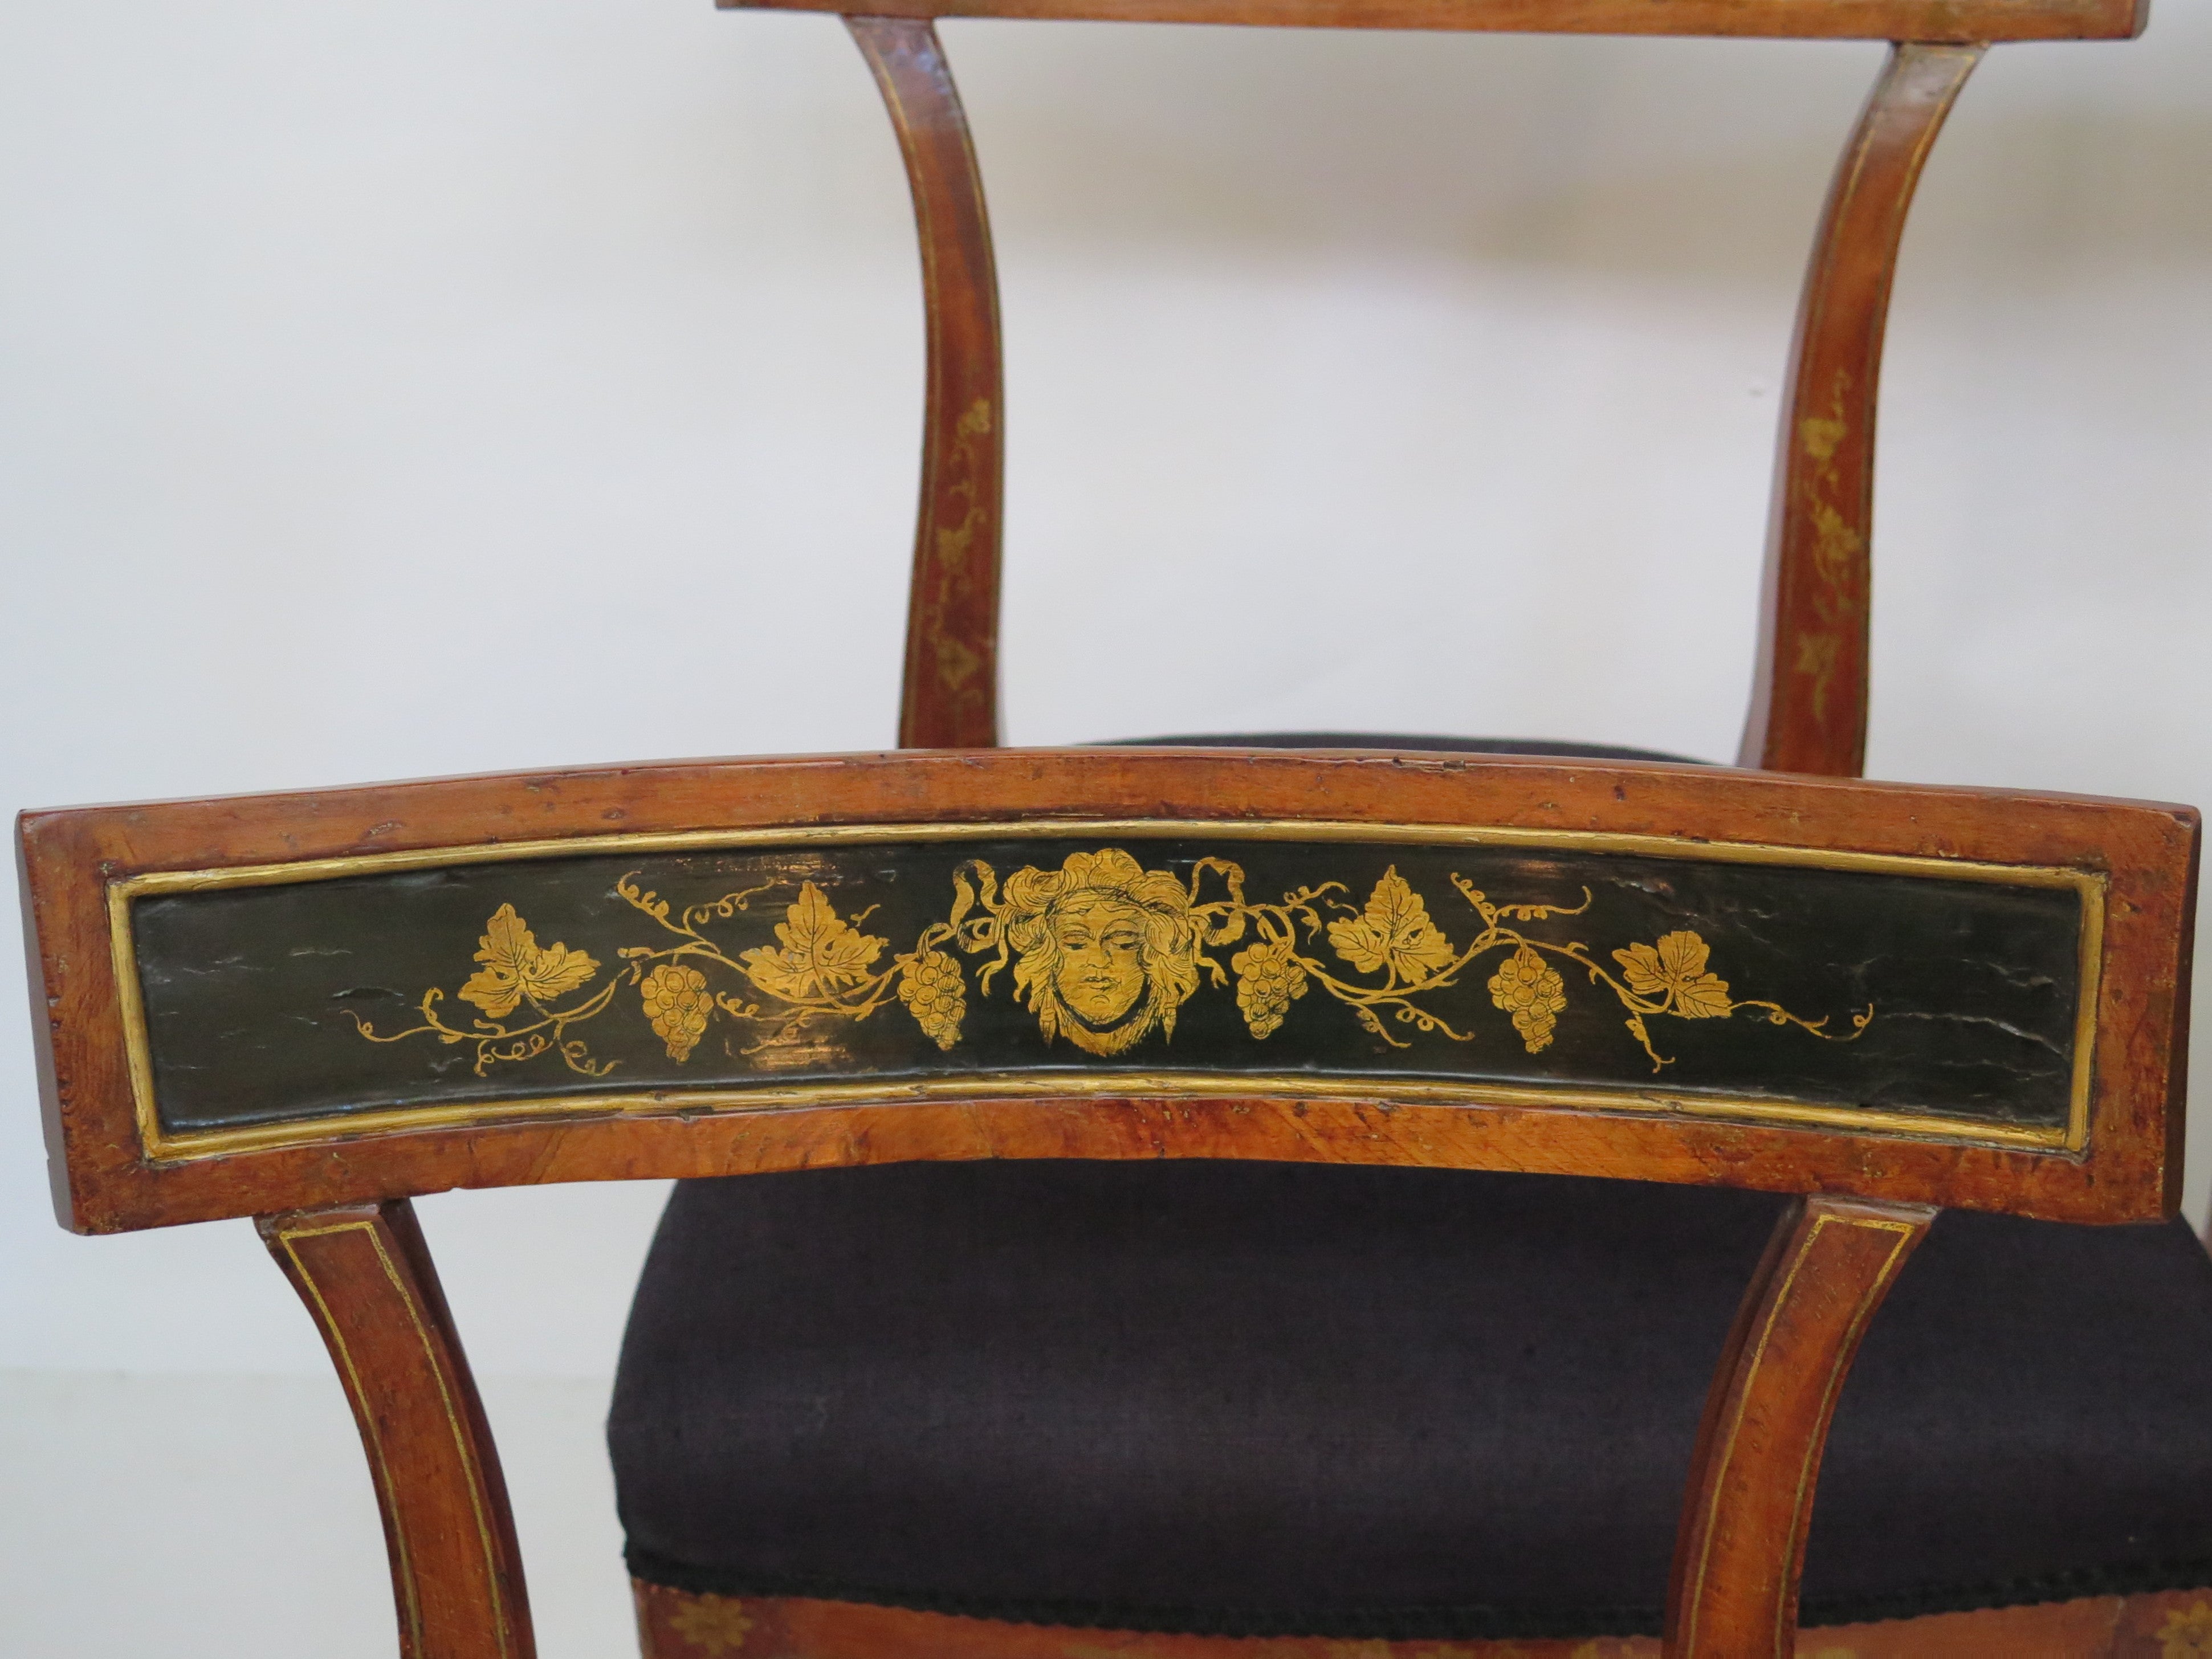 English Regency Side Chairs / Set of Four